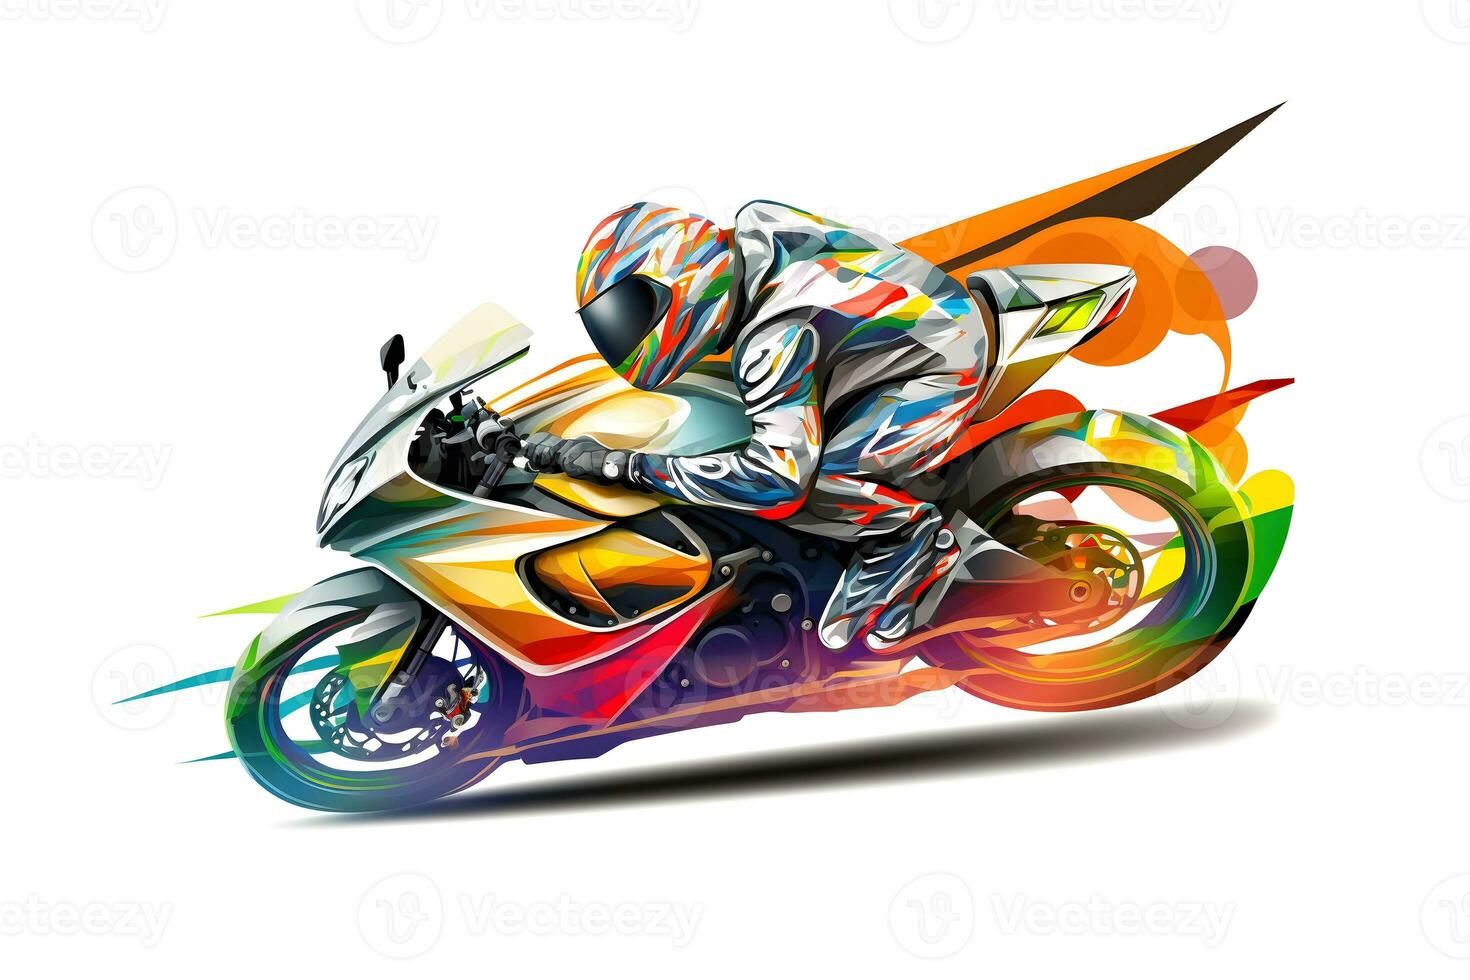 Sticker of Biker on sport motorcycle in watercolor style on white background. Neural network generated art photo